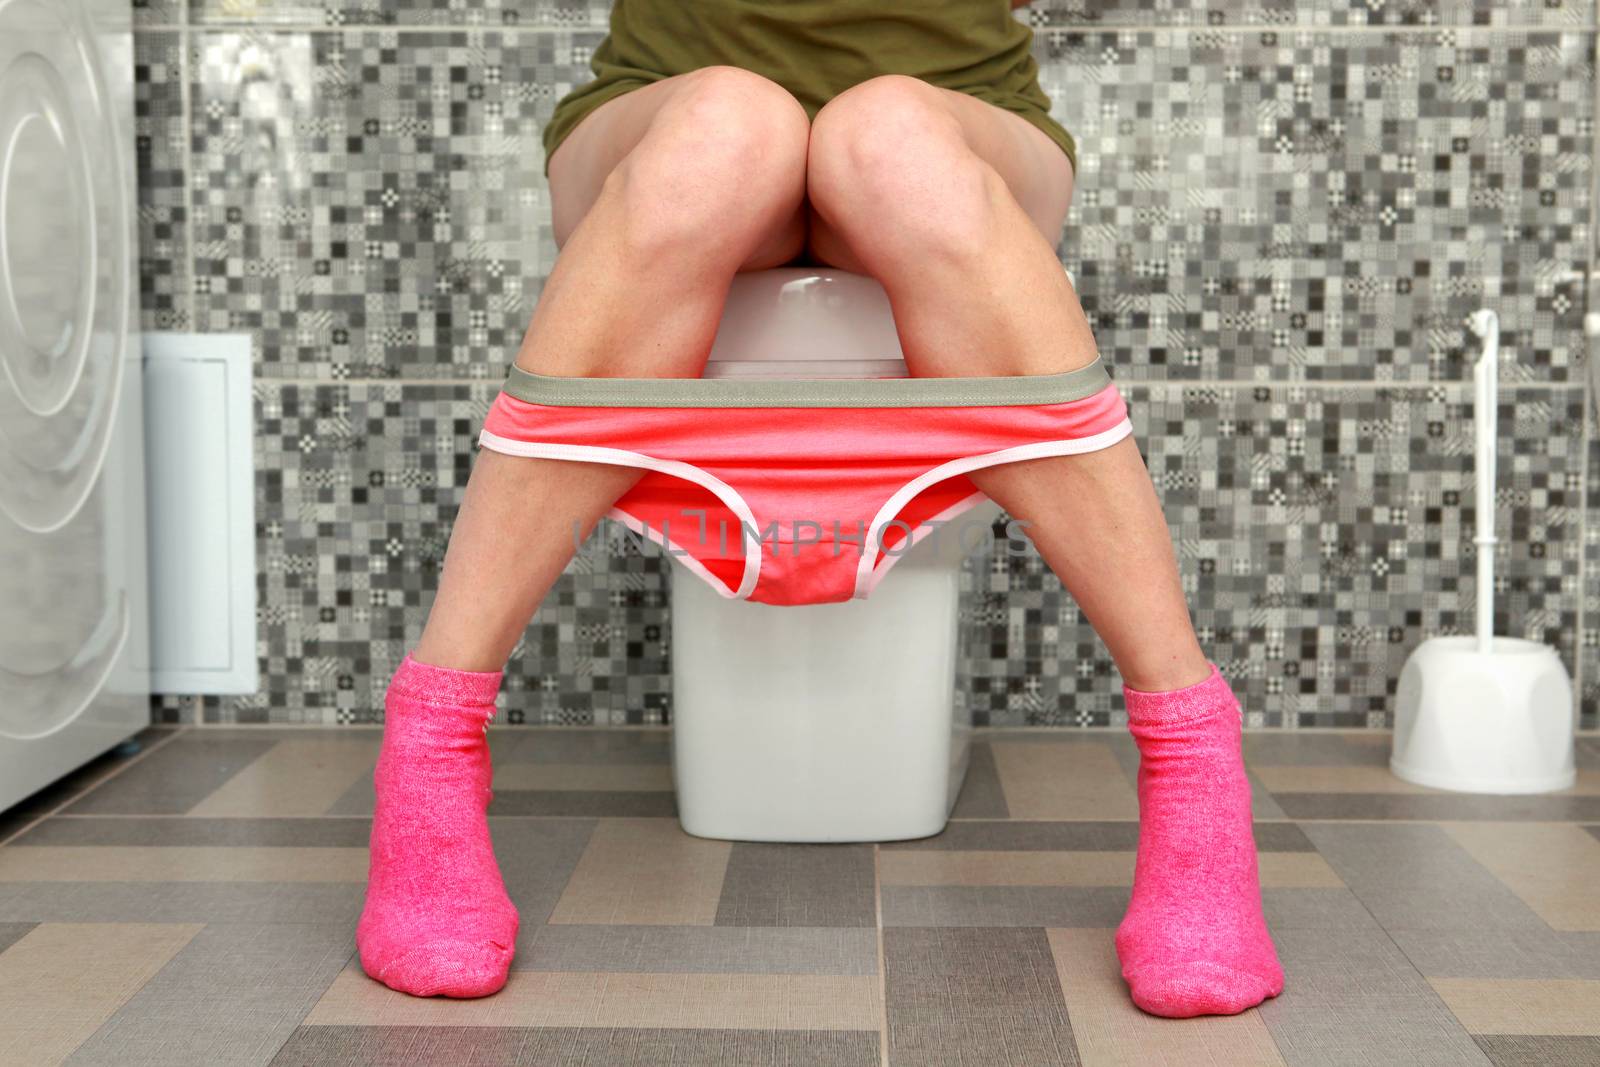 woman sits on toilet bowl by ssuaphoto